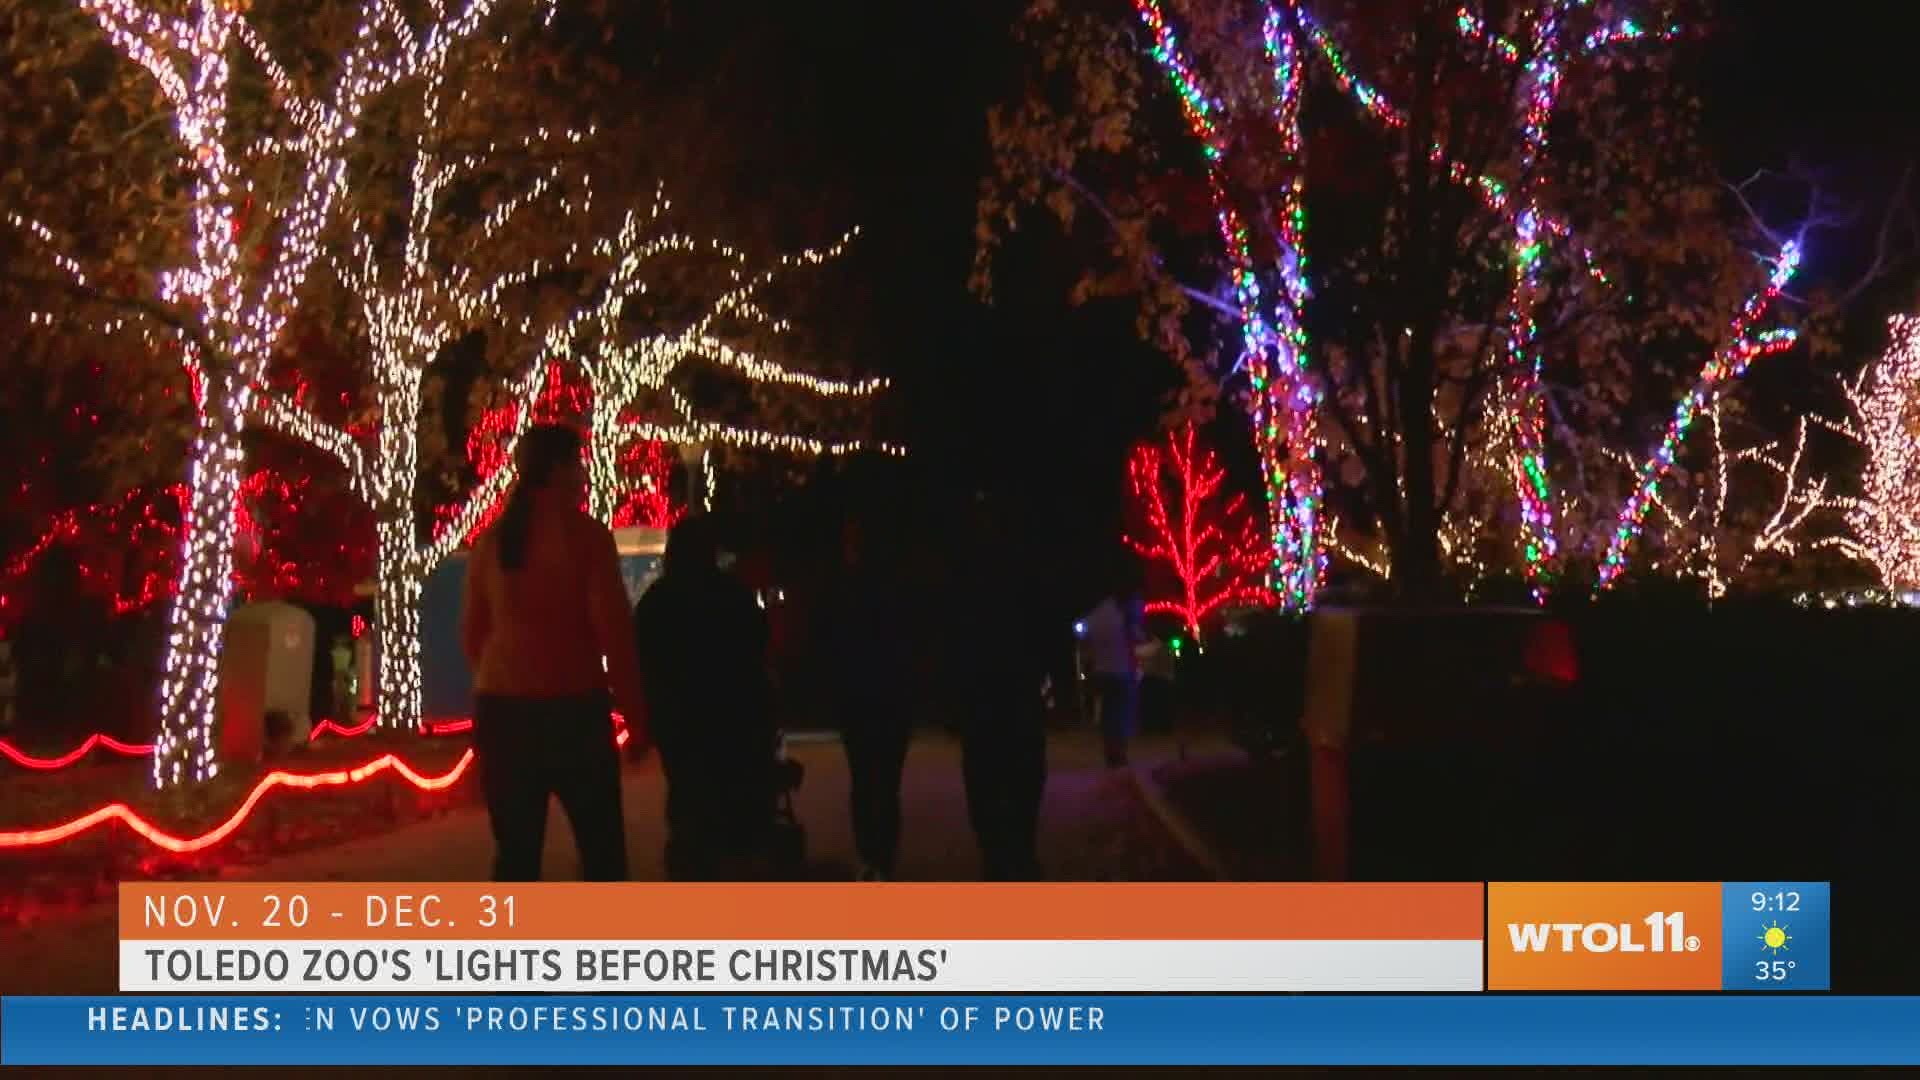 Free memberships to the zoo will be given out throughout the duration of 'Lights Before Christmas' this year.